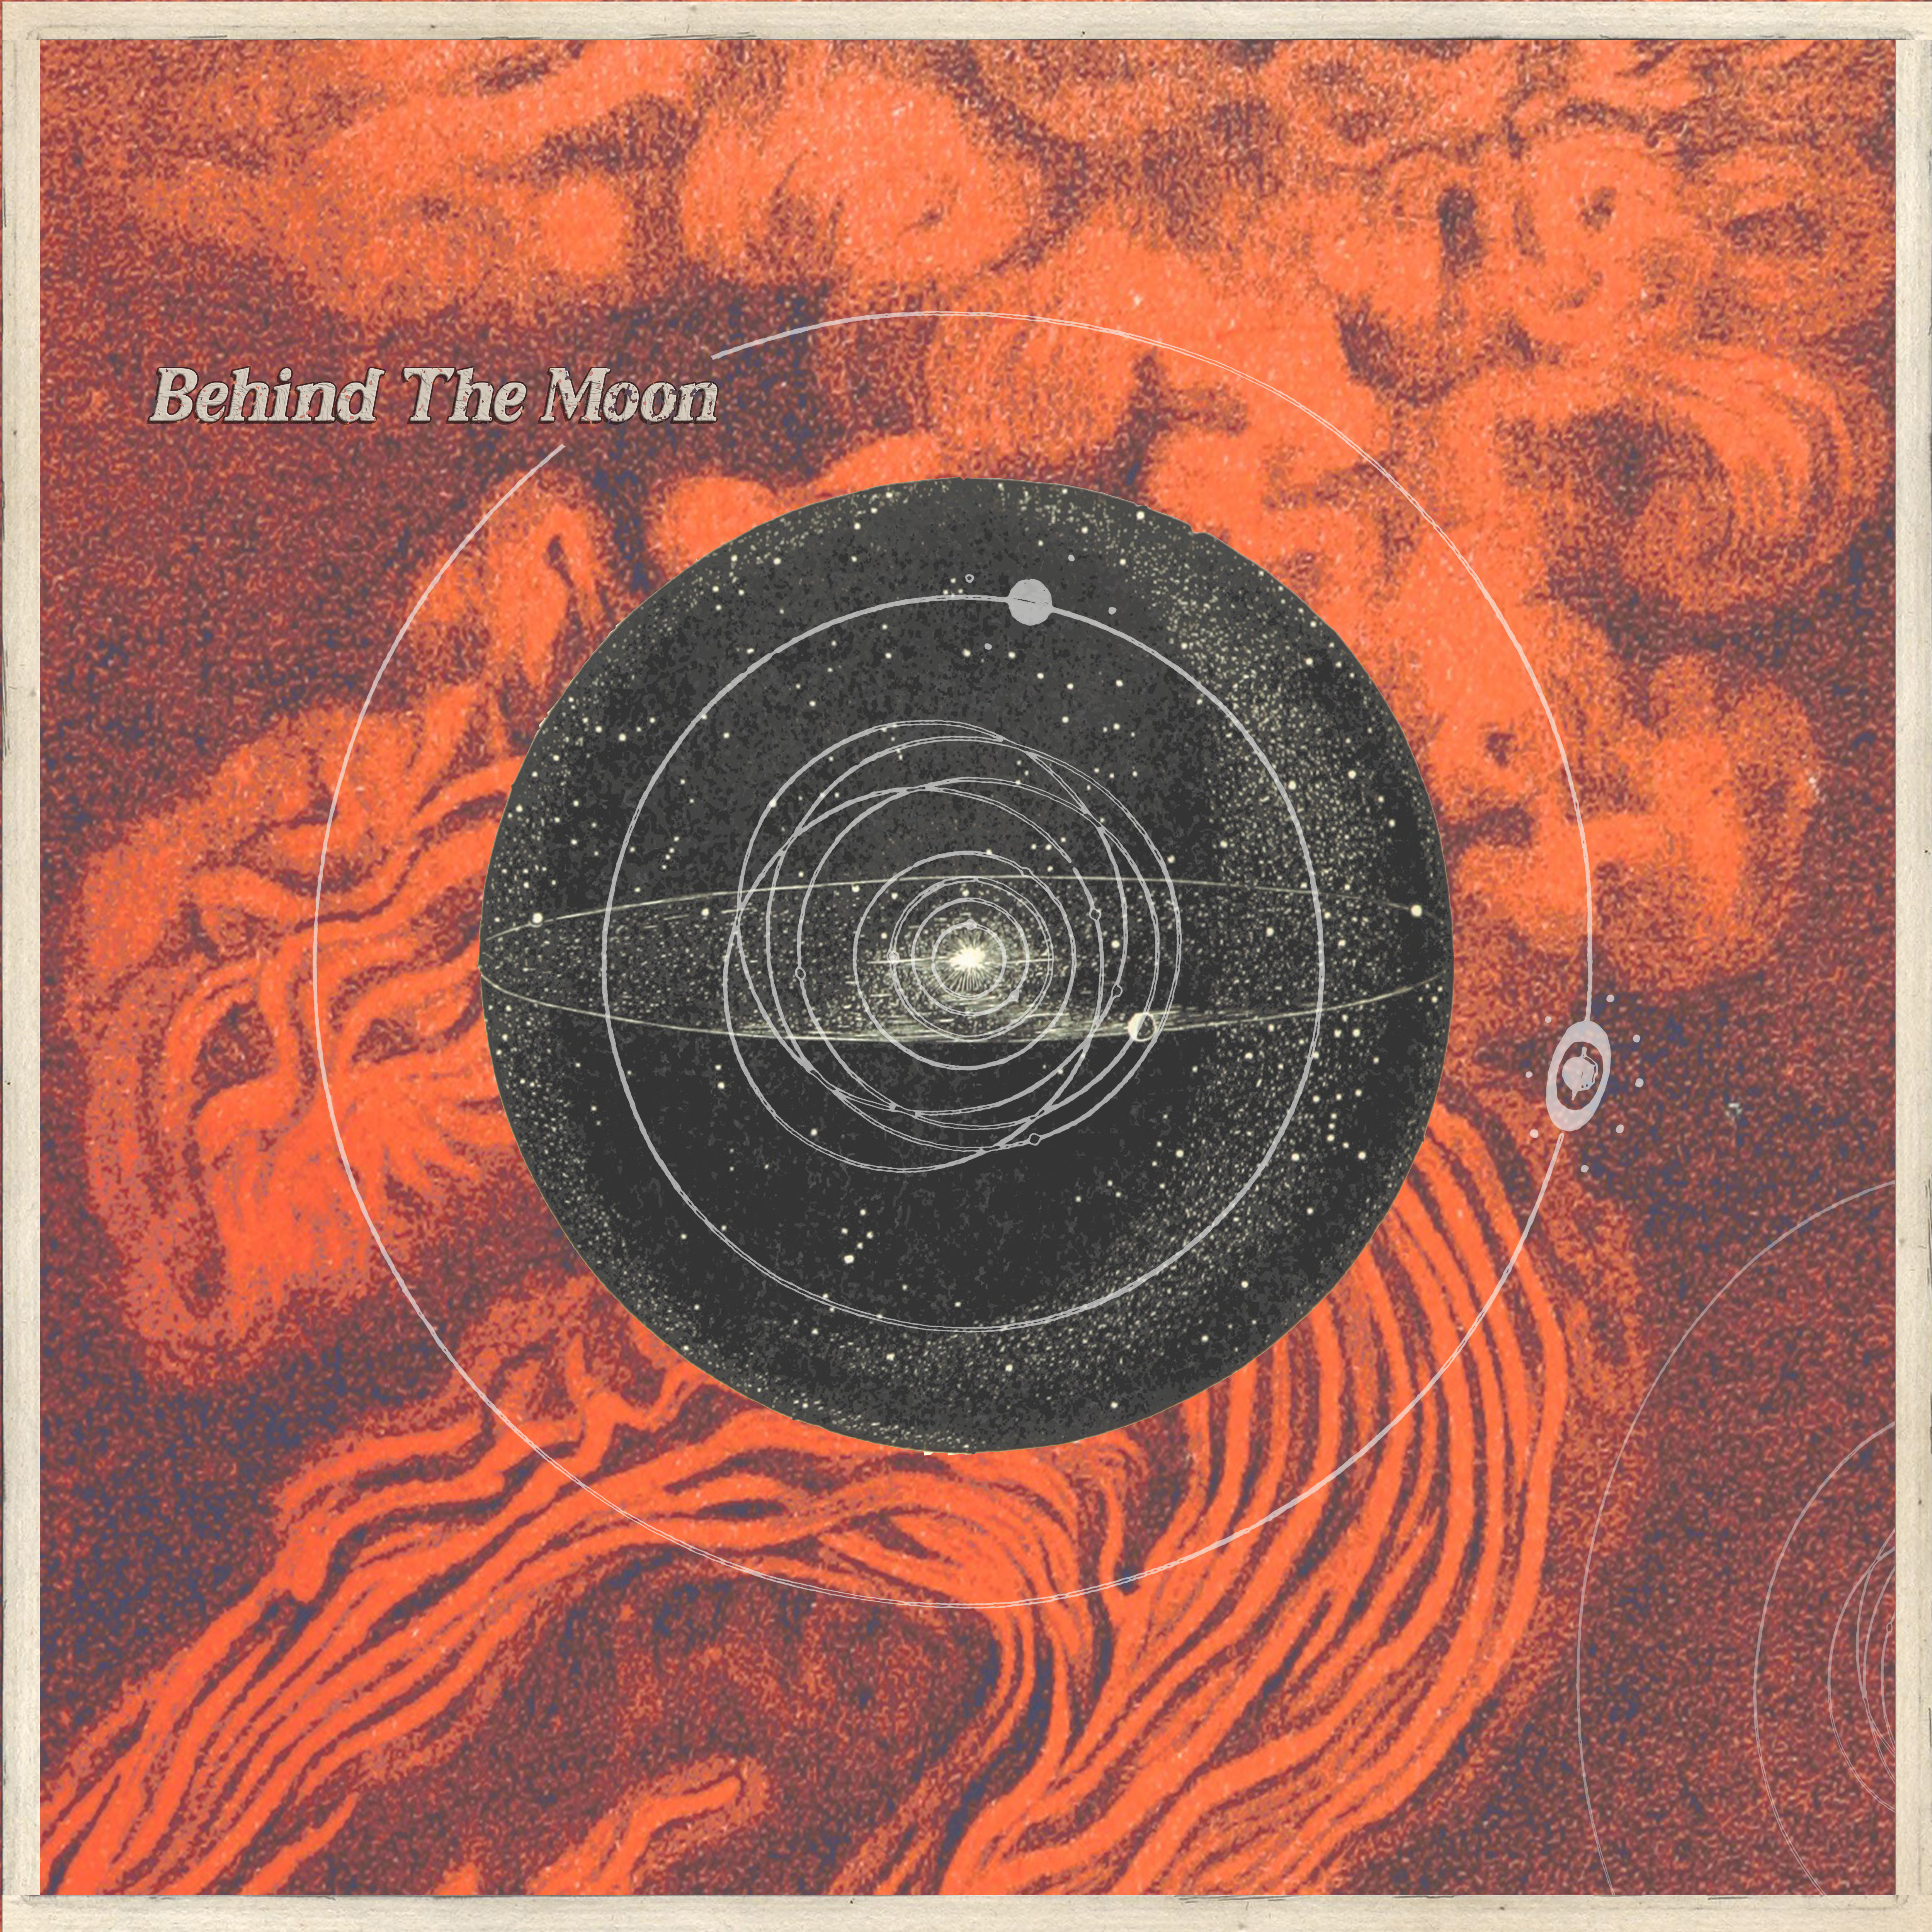 Motifv Releases New Genre-Blending EP: ‘Behind the Moon’